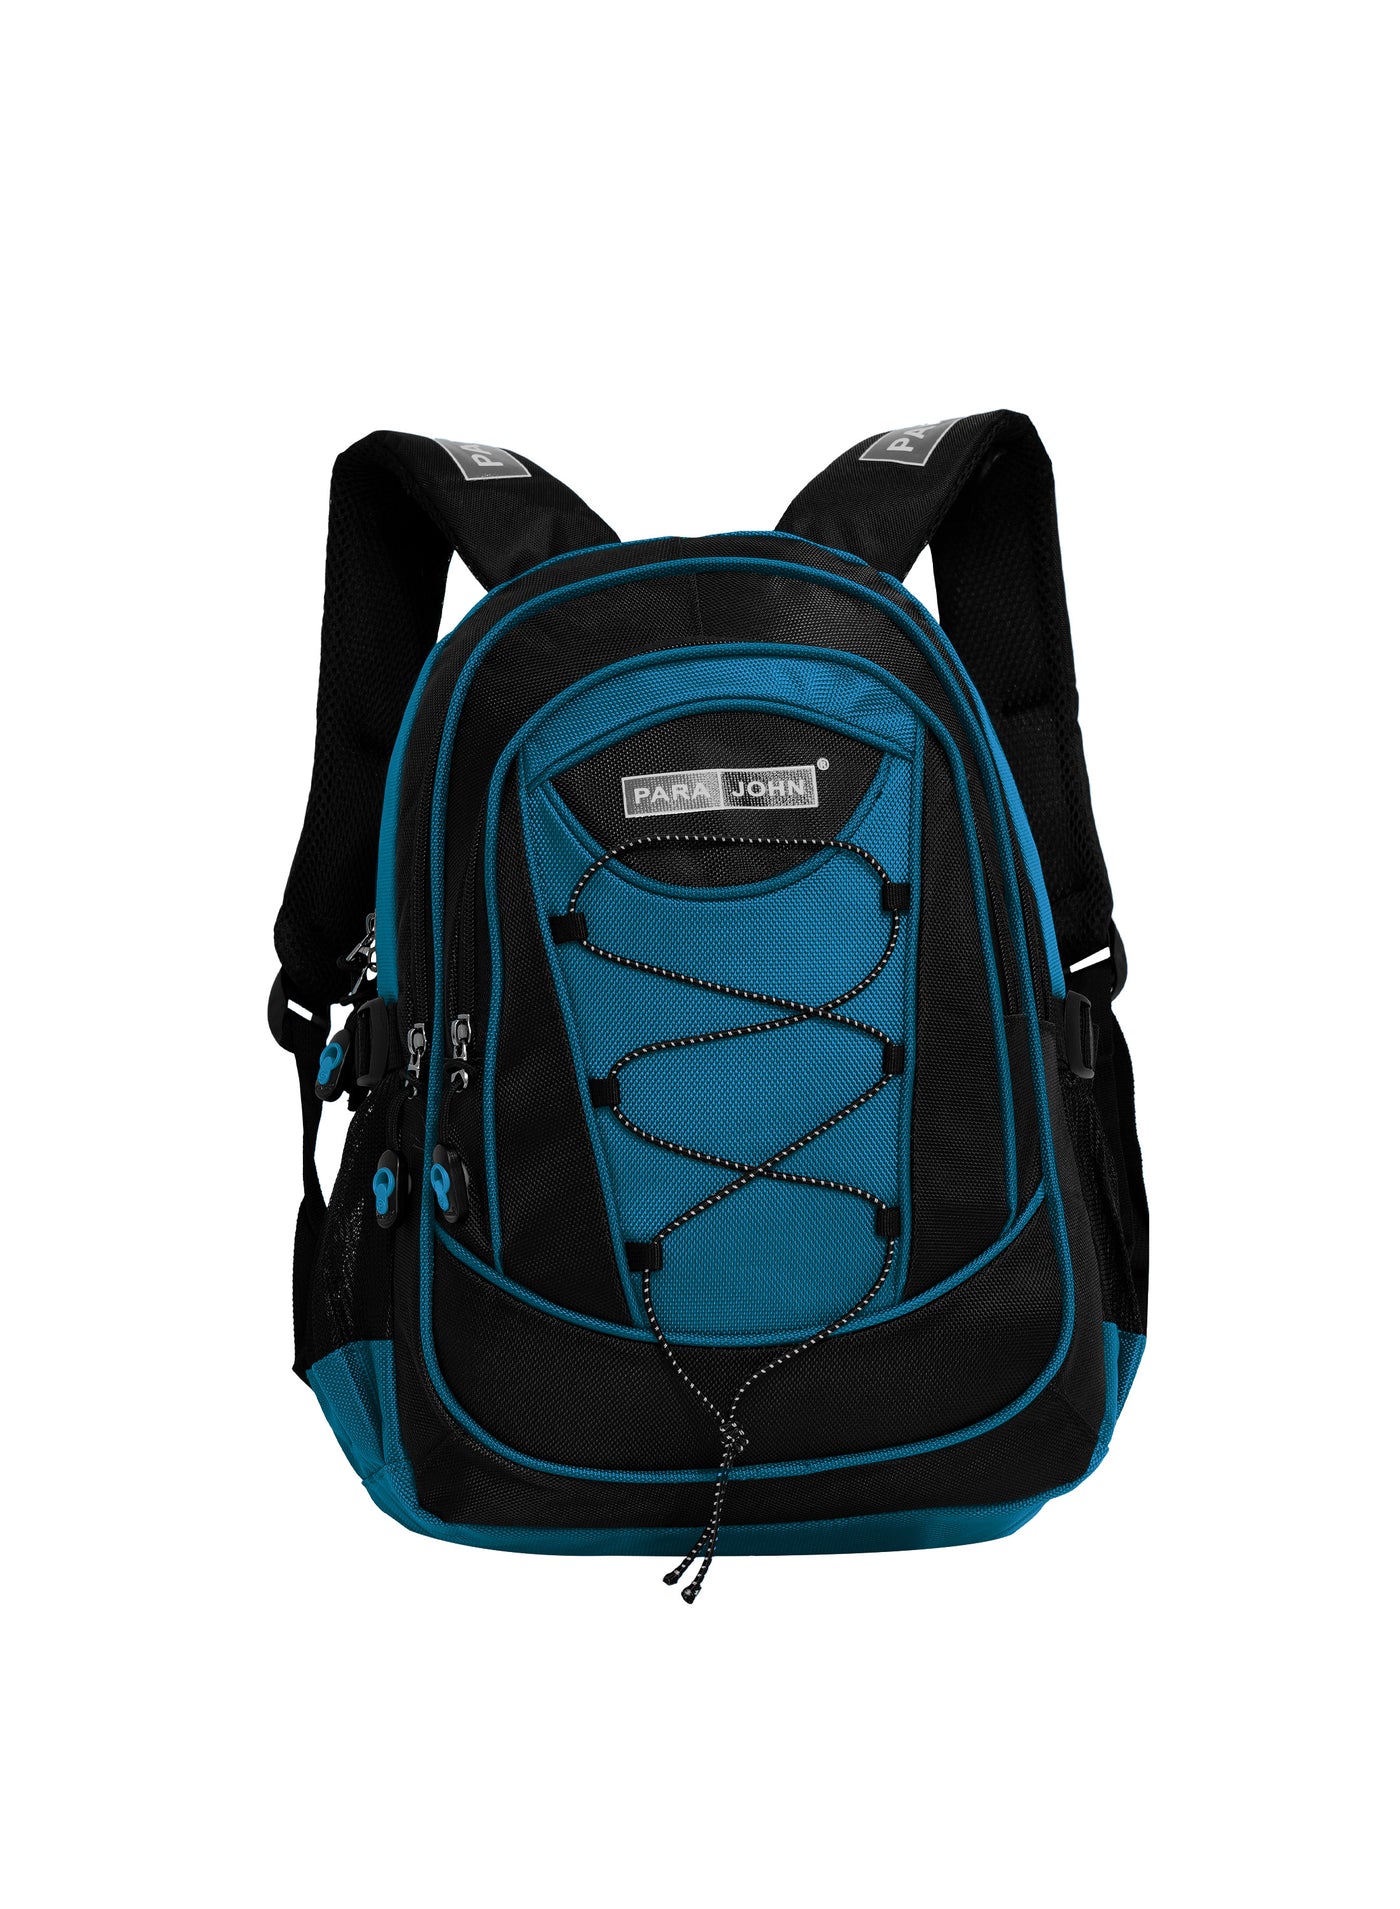 Classic Students School Backpack Blue 18 Inch